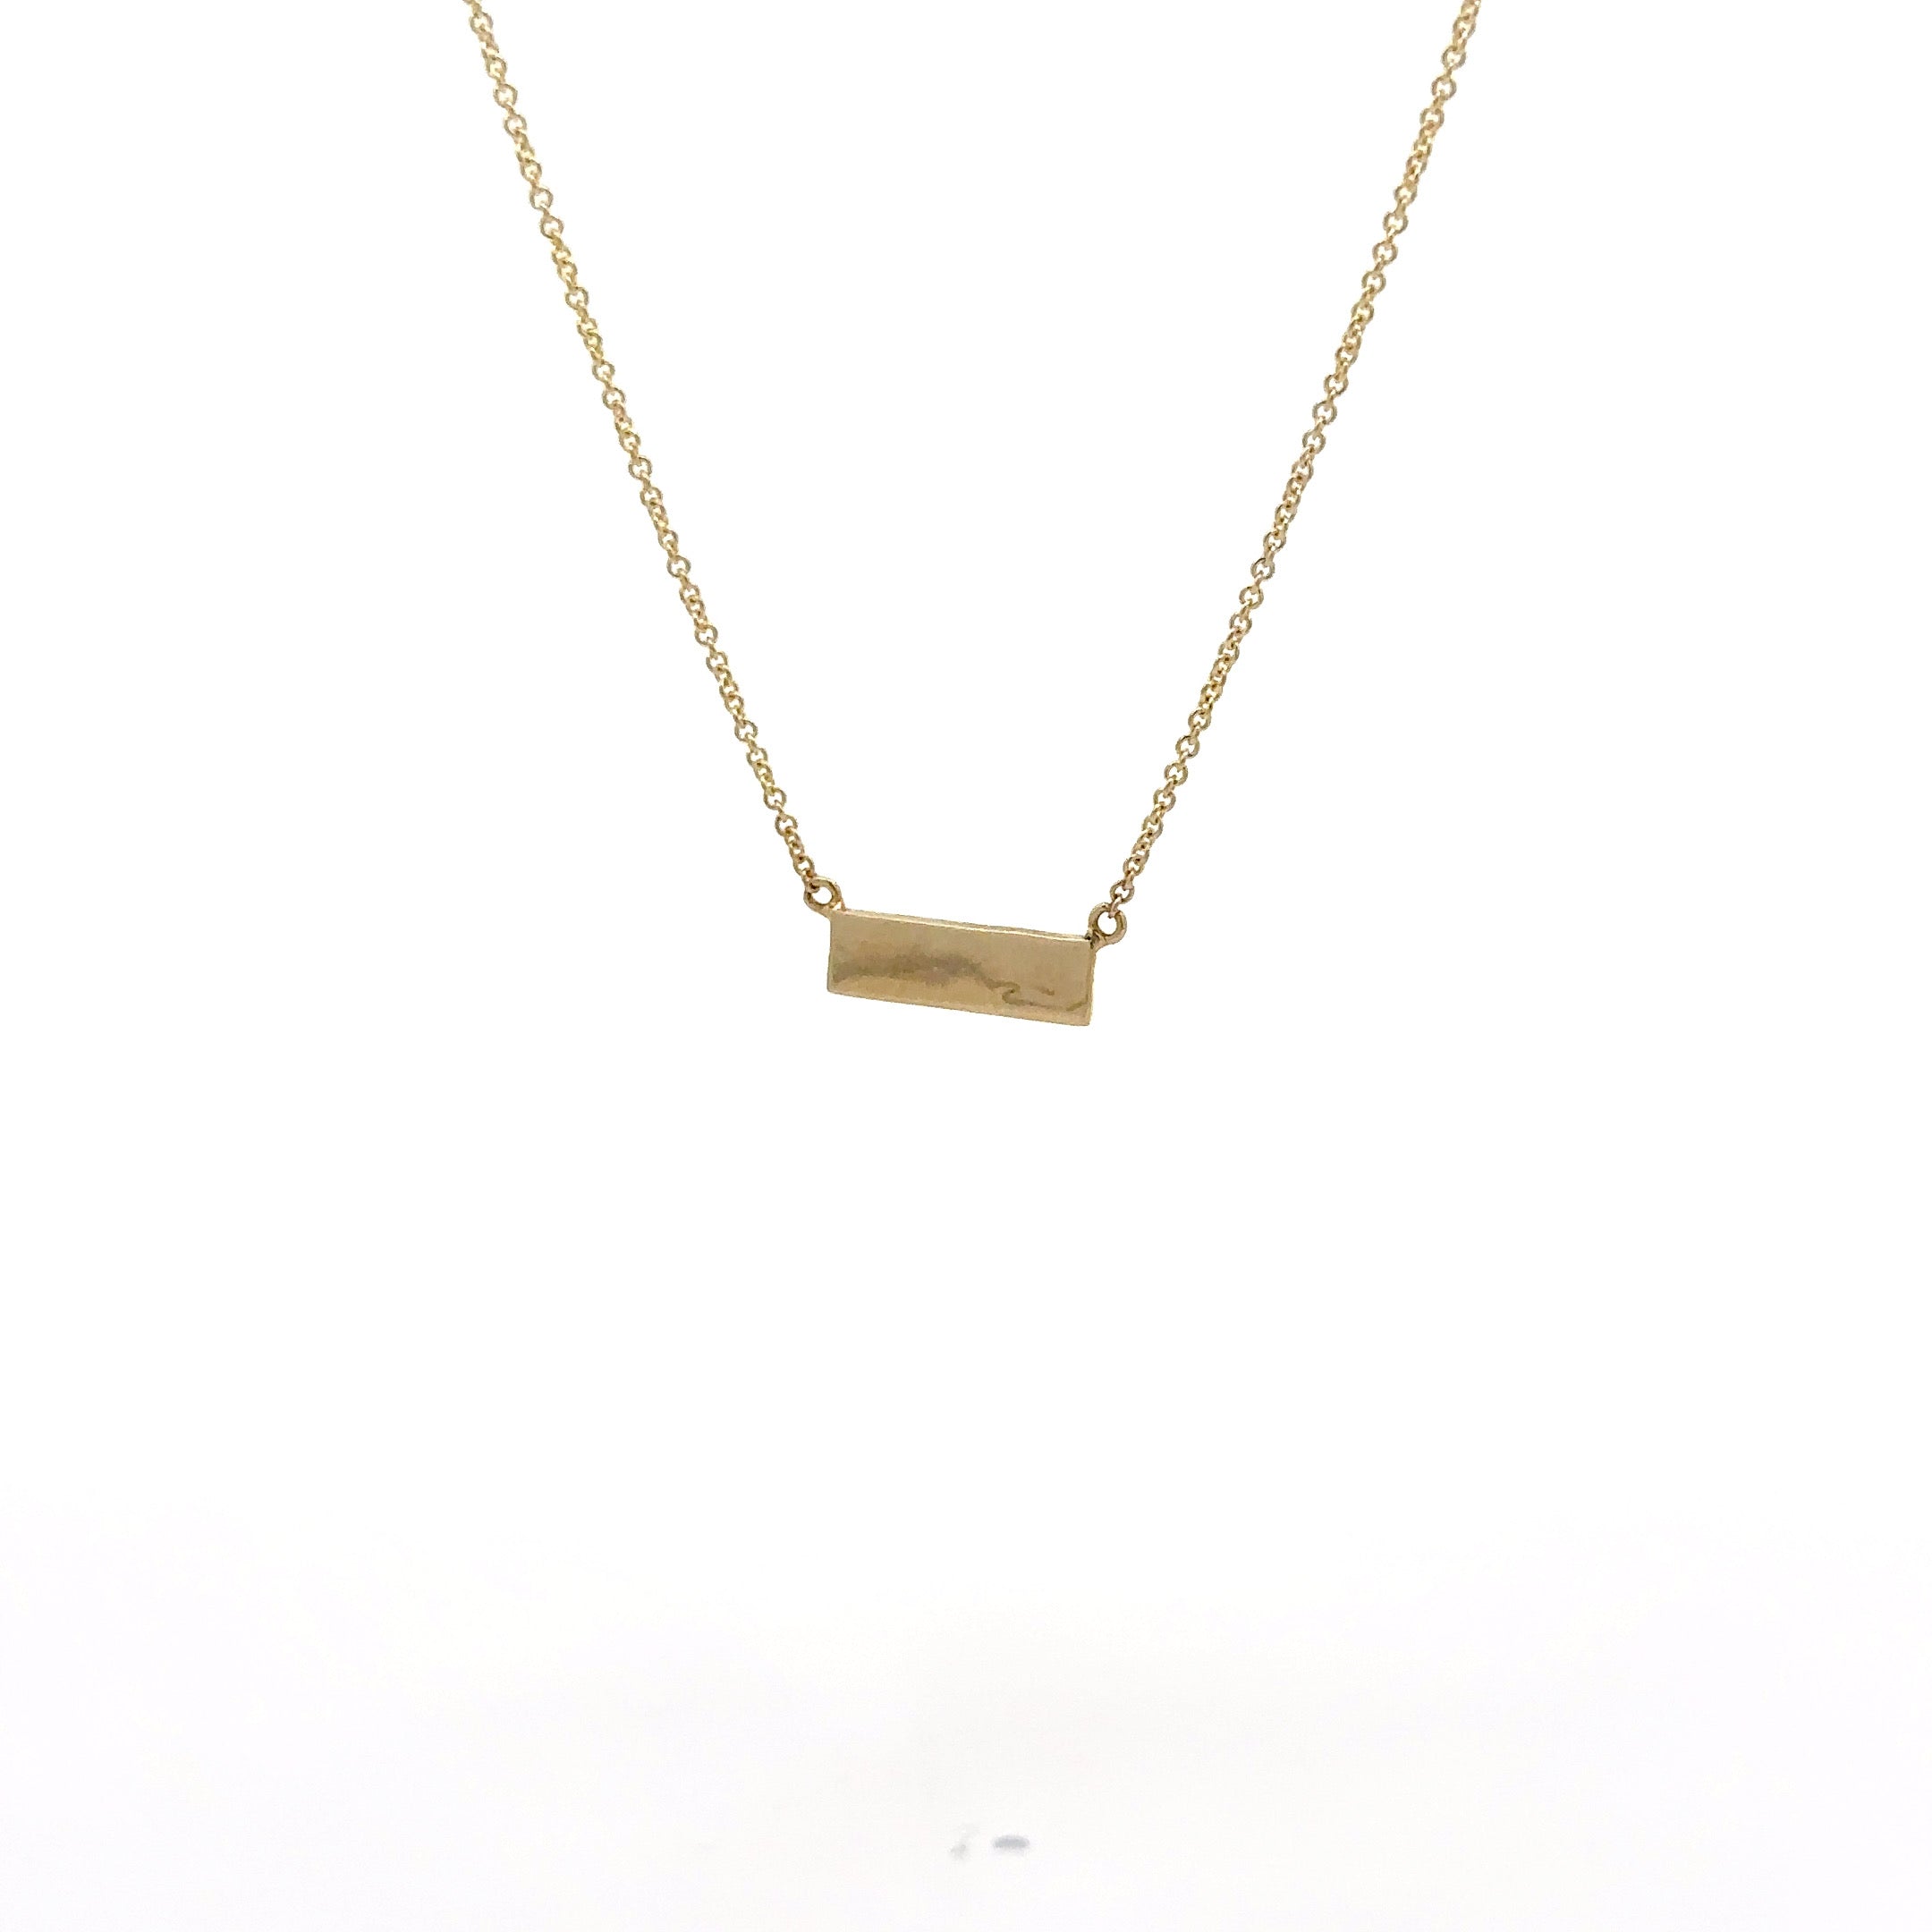 Buildon01, 14kt gold, 18in chain w loop at 16in, 2 bars one with pave one with laser or plain necklace